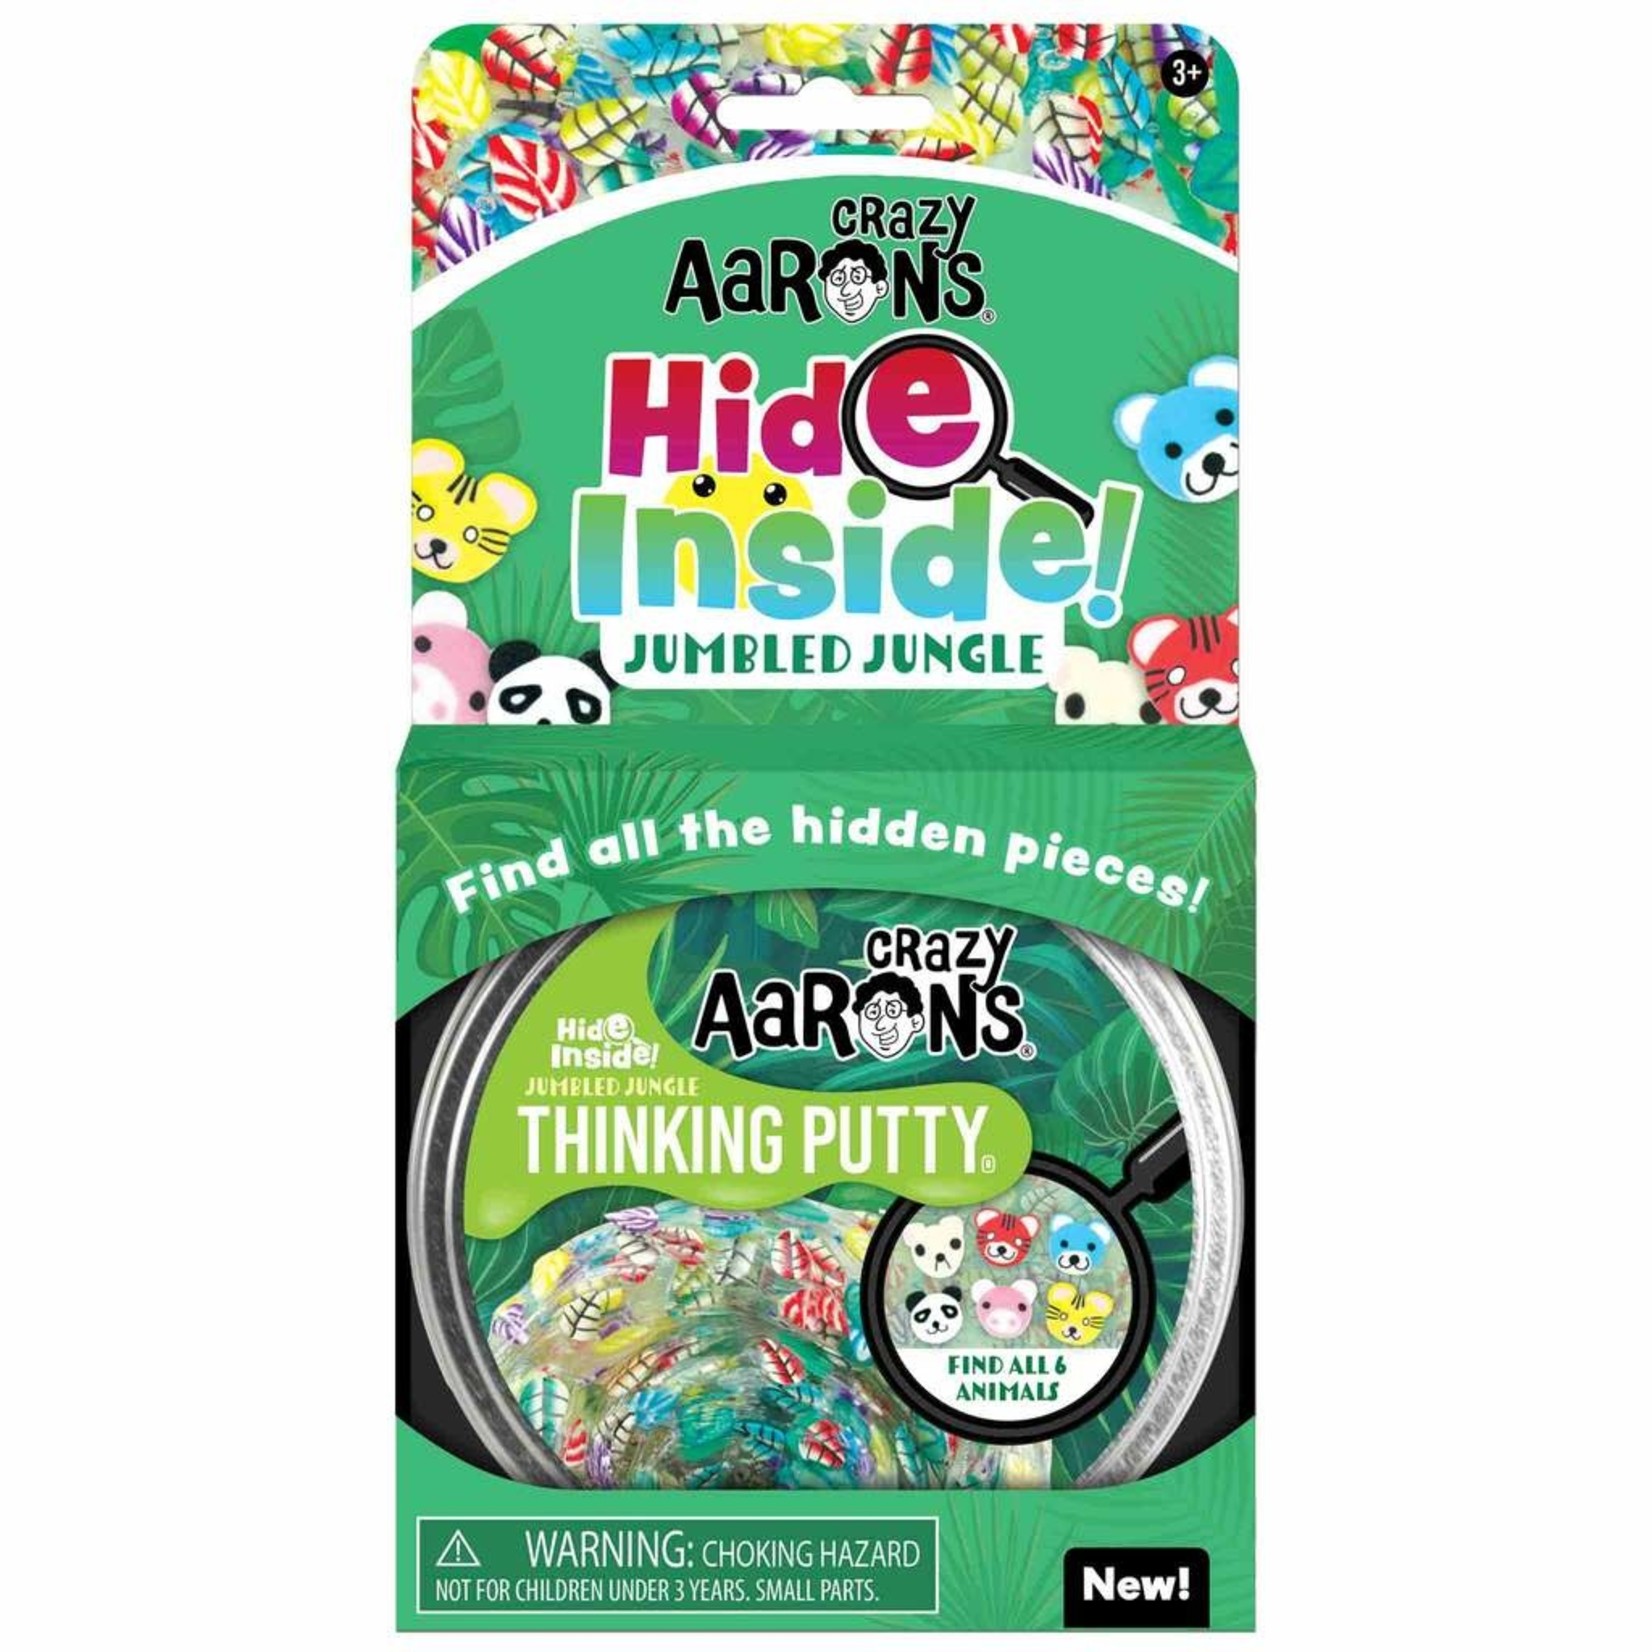 Crazy Aaron's Thinking Putty Hide Inside! Jumbled Jungle Thinking Putty